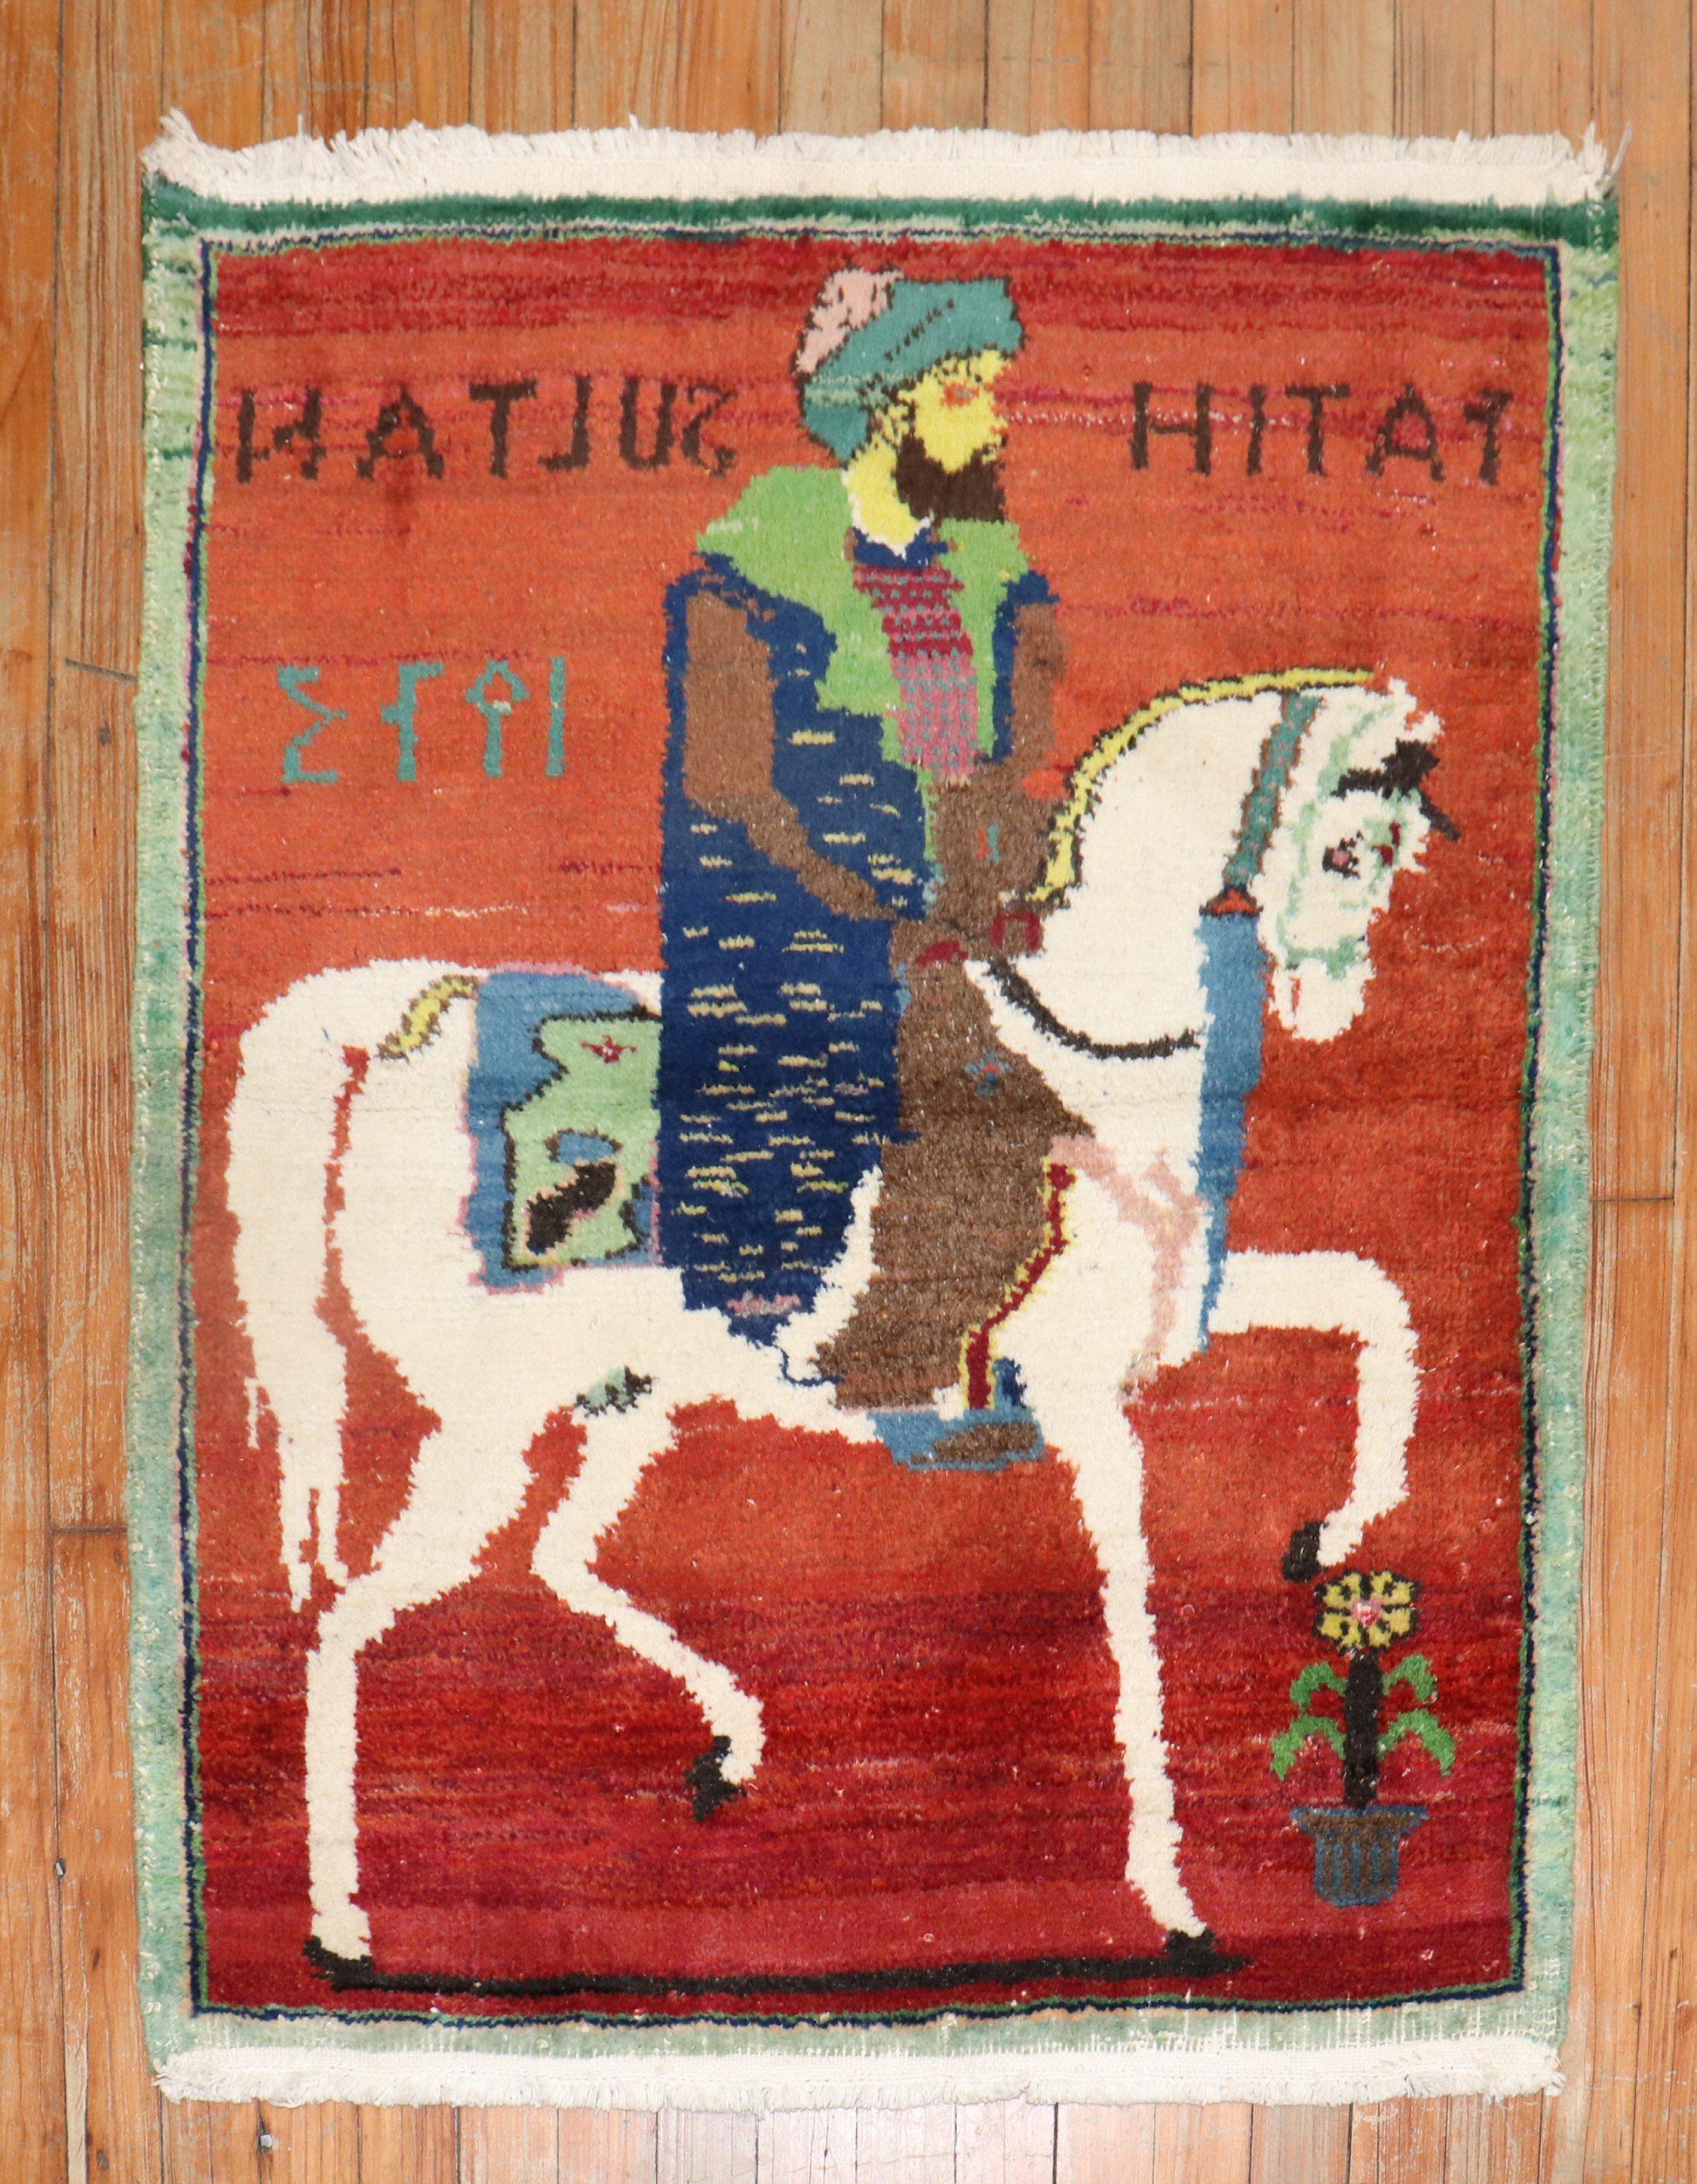 Vintage Turkish Pictorial Rug depicting a bearded gentleman riding on his horse on a red ground. dated 1973, the turkish names woven inscribed in seem to make it a dowry gift

Measures: 2'8'' x 3'2''.